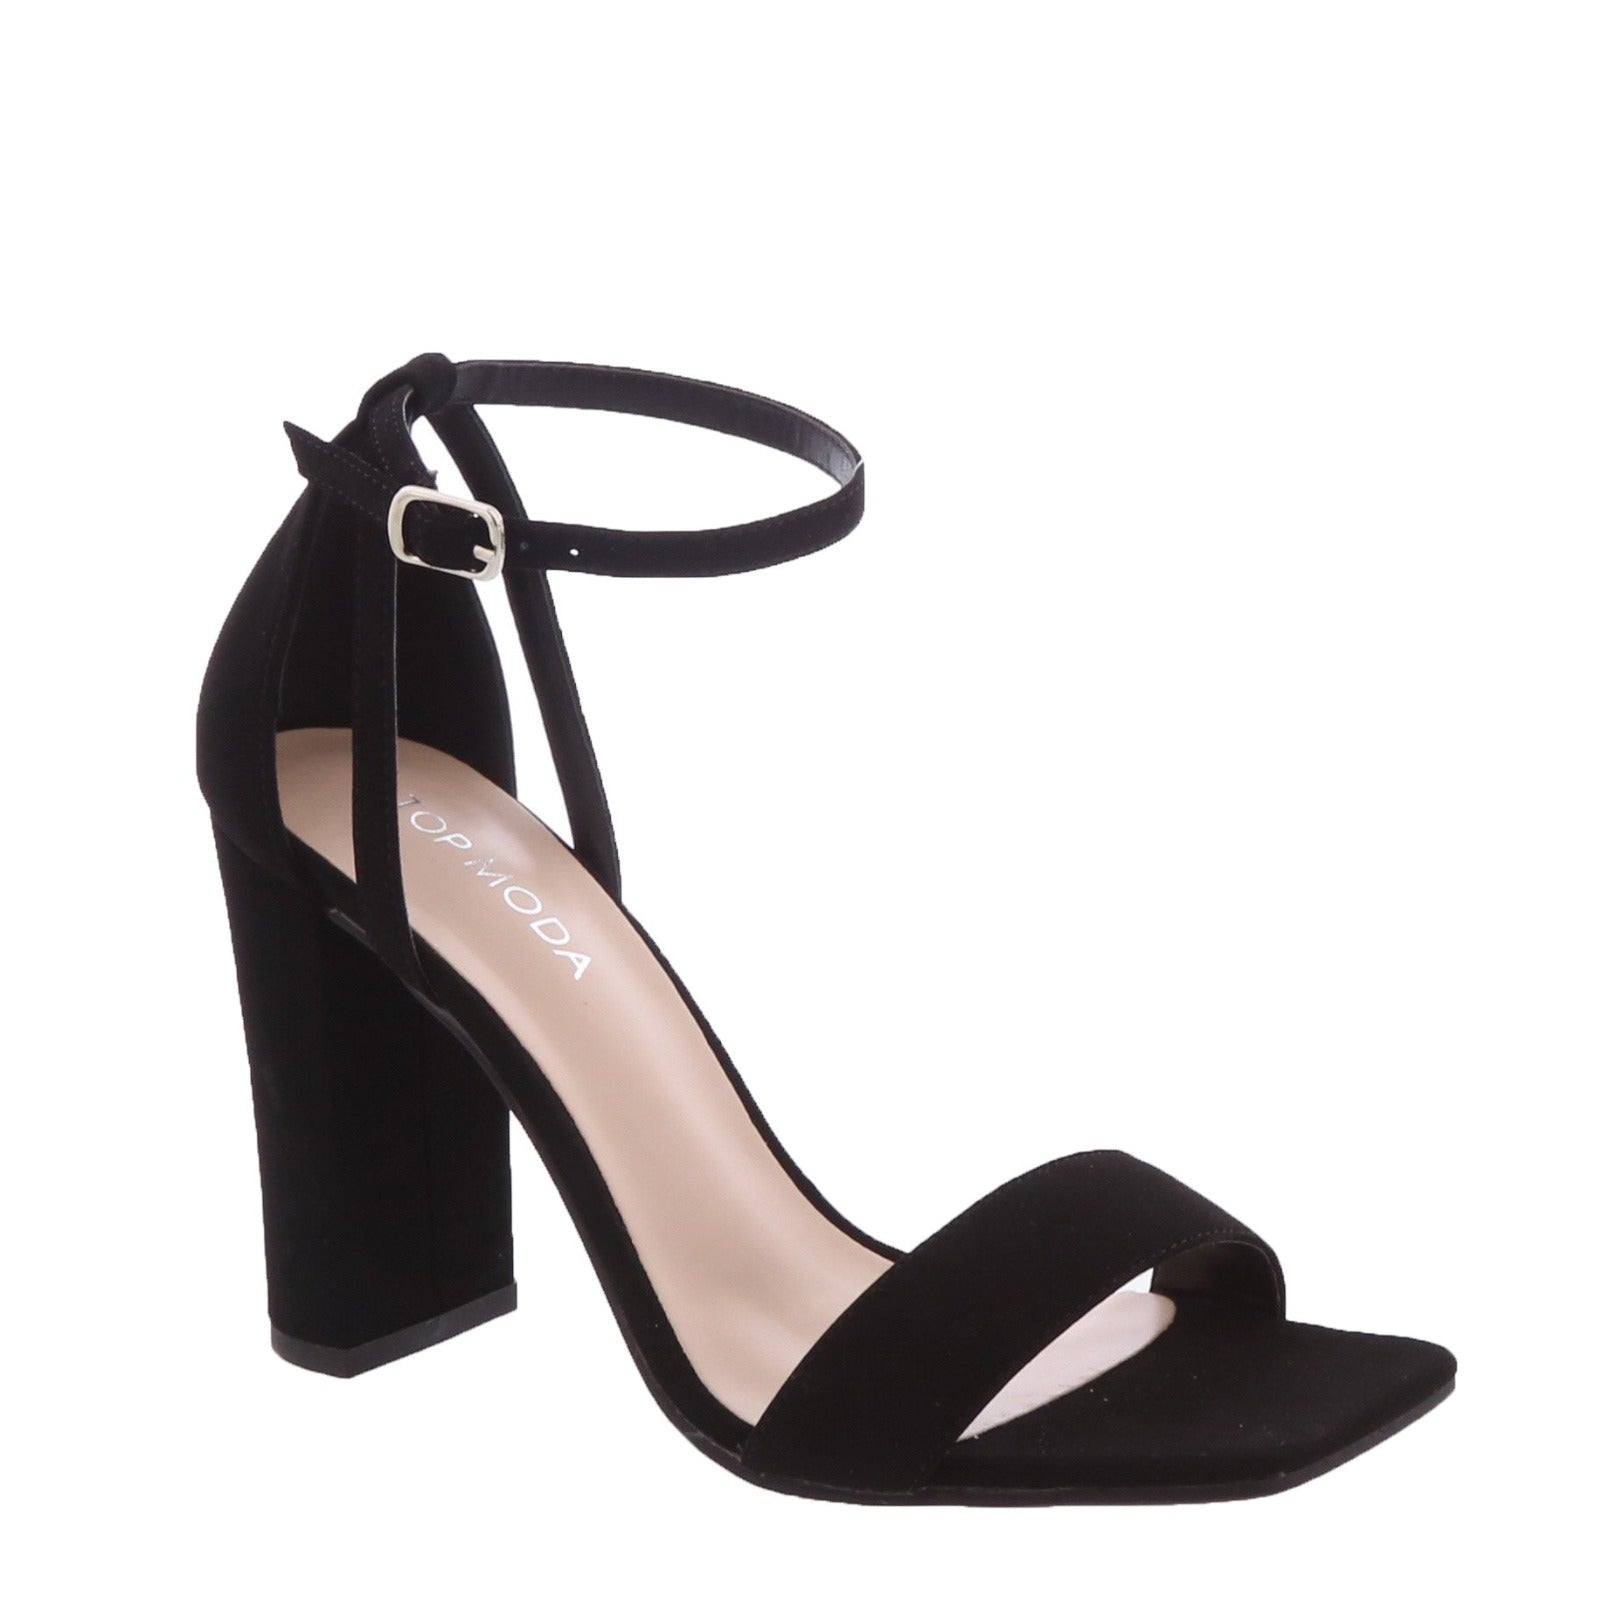 Artificial Patent PU Thin Ankle Strap Heels | SHEIN ASIA